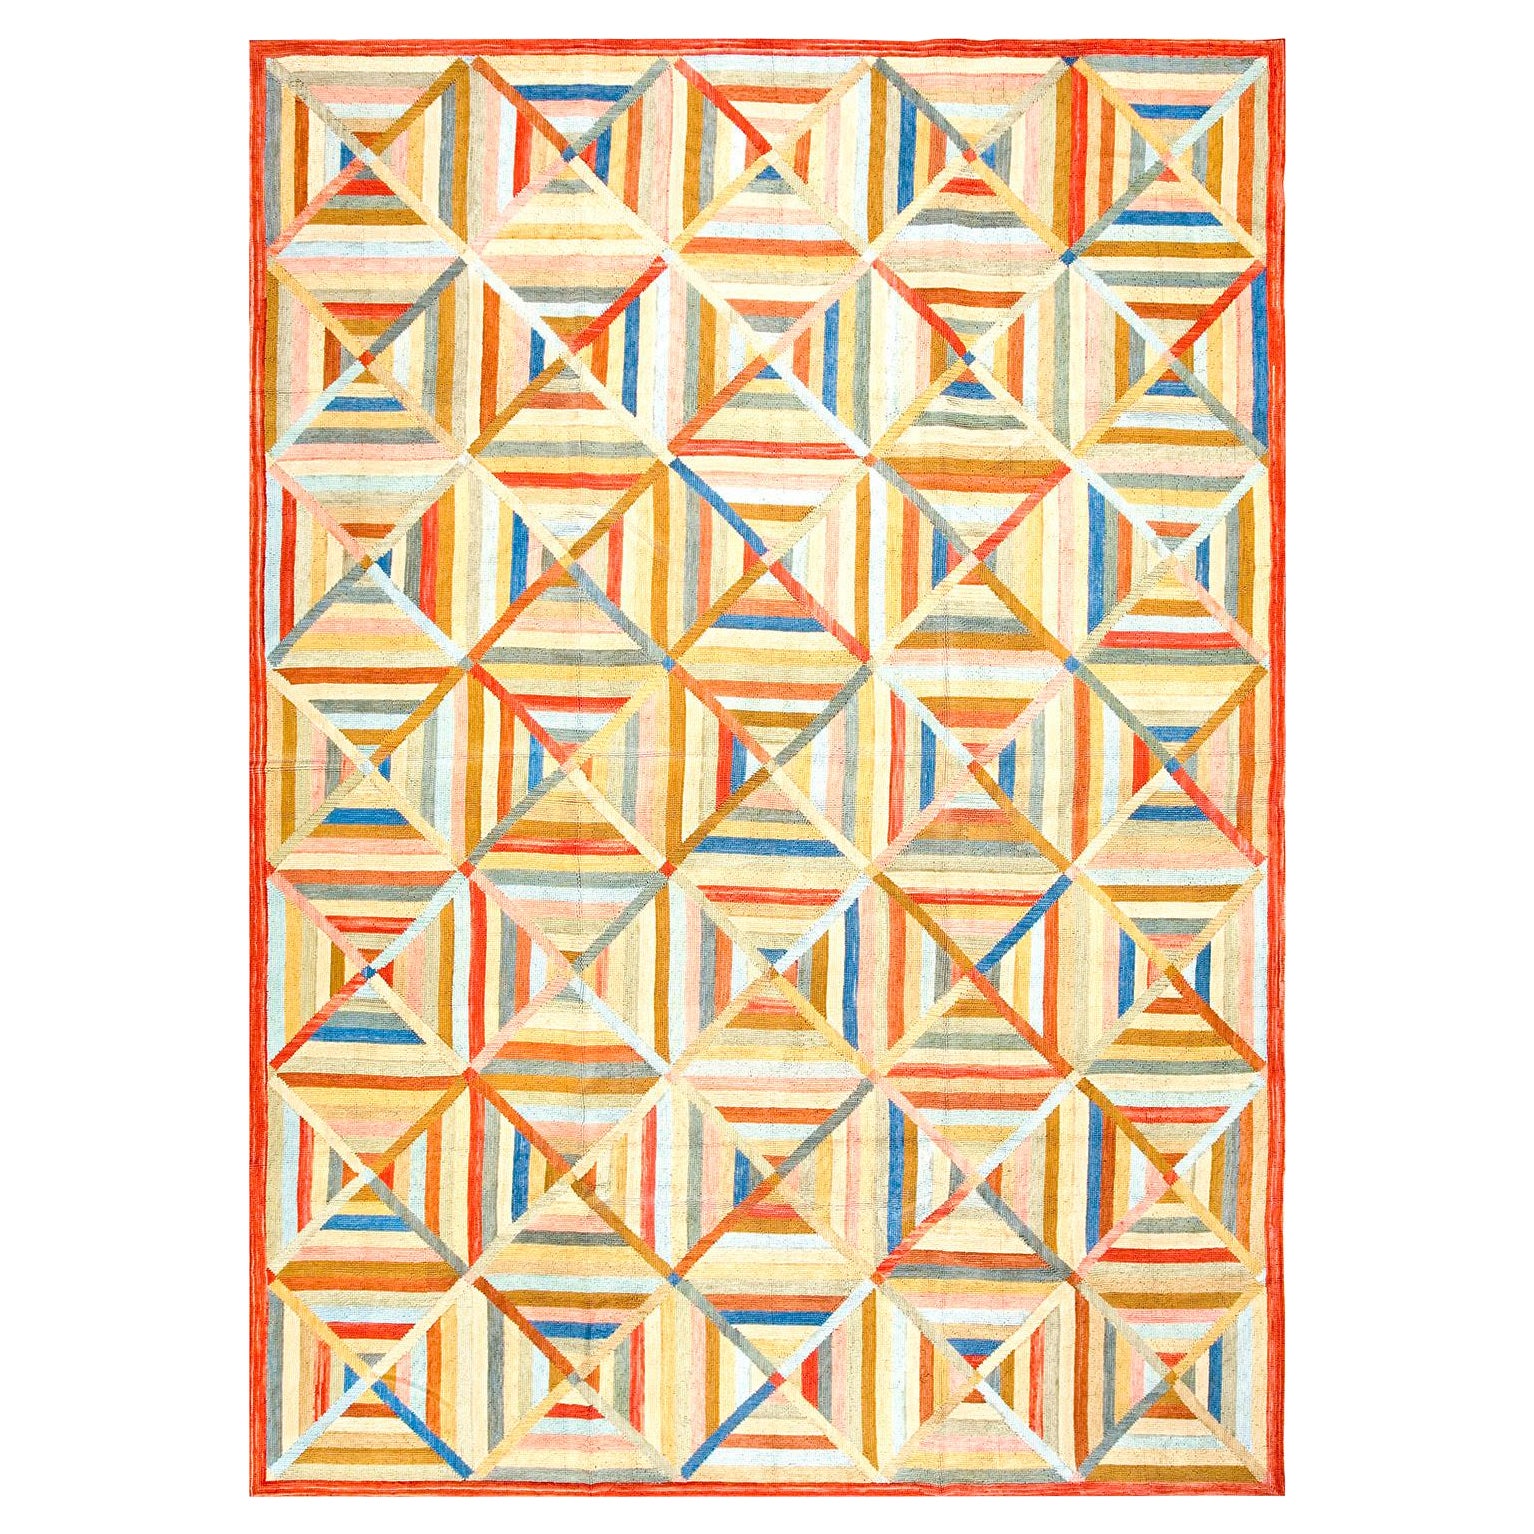 Contemporary Handmade Cotton Hooked Rug ( 6' x 9' - 183 x 274cm ) For Sale